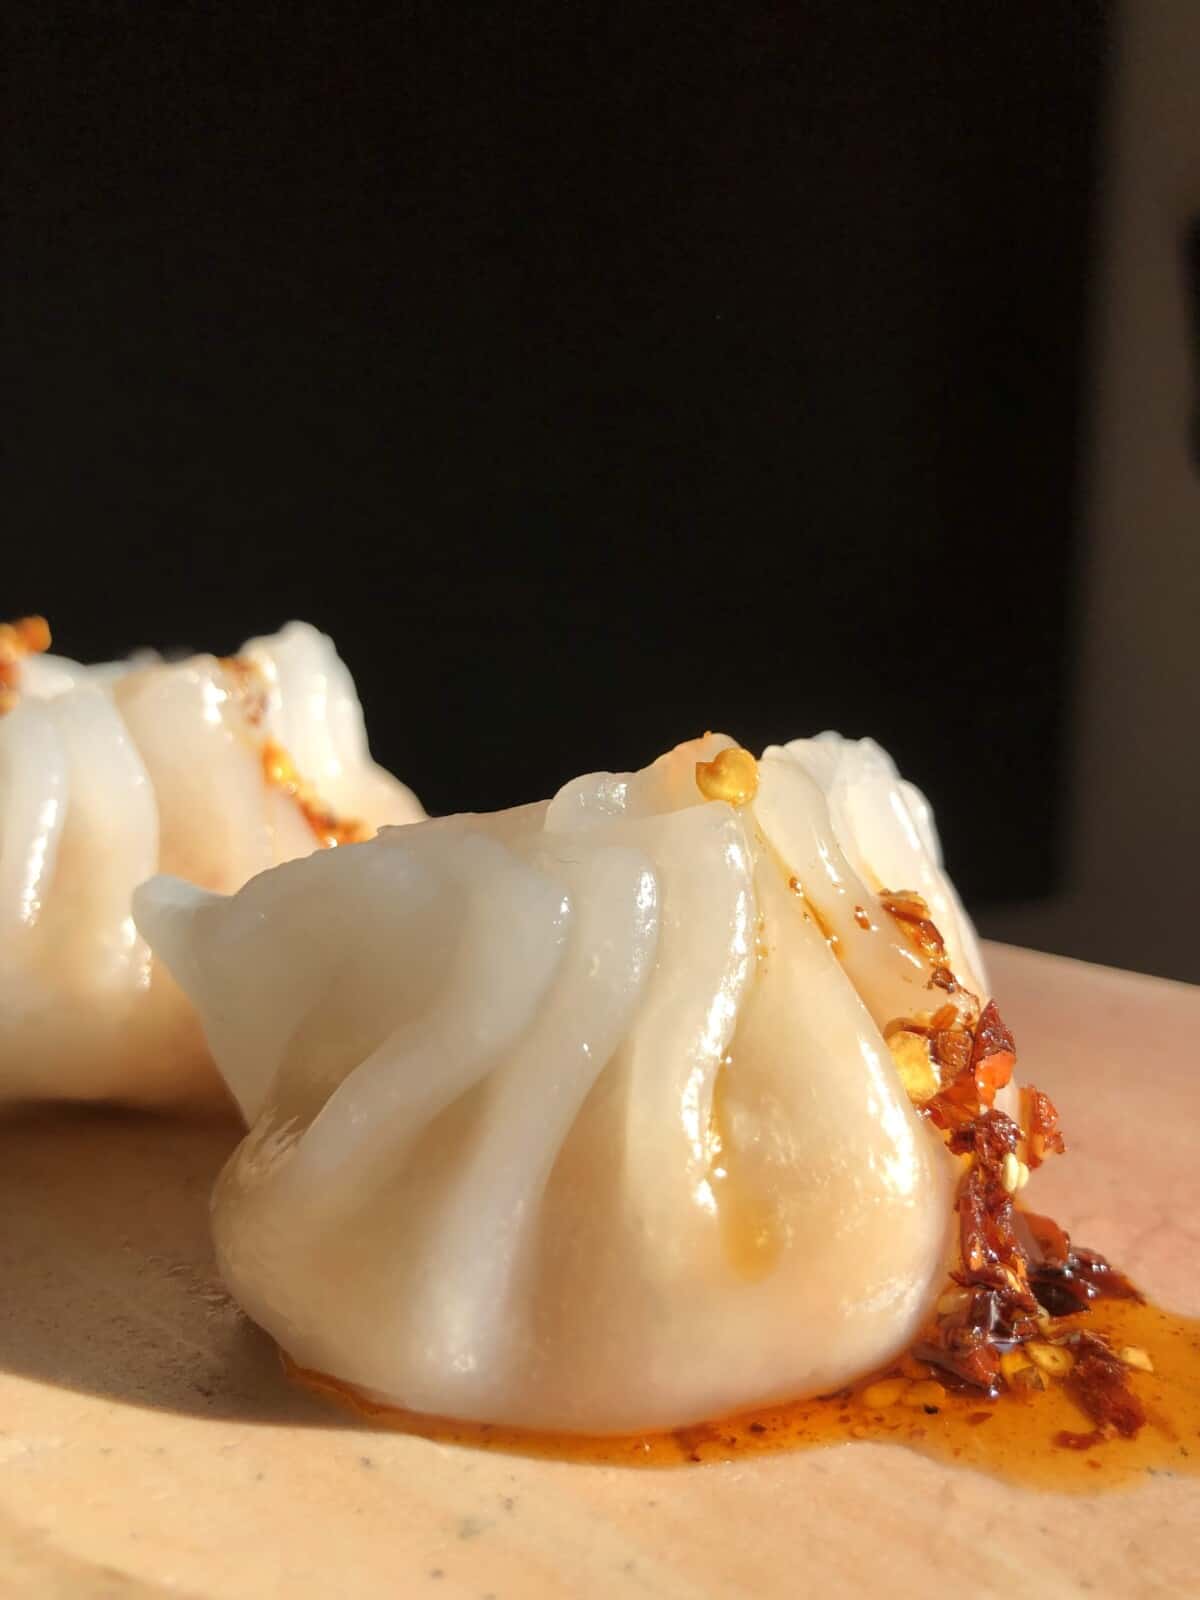 plump crystal shrimp dumplings drizzled with homemade sichuan crispy chili oil